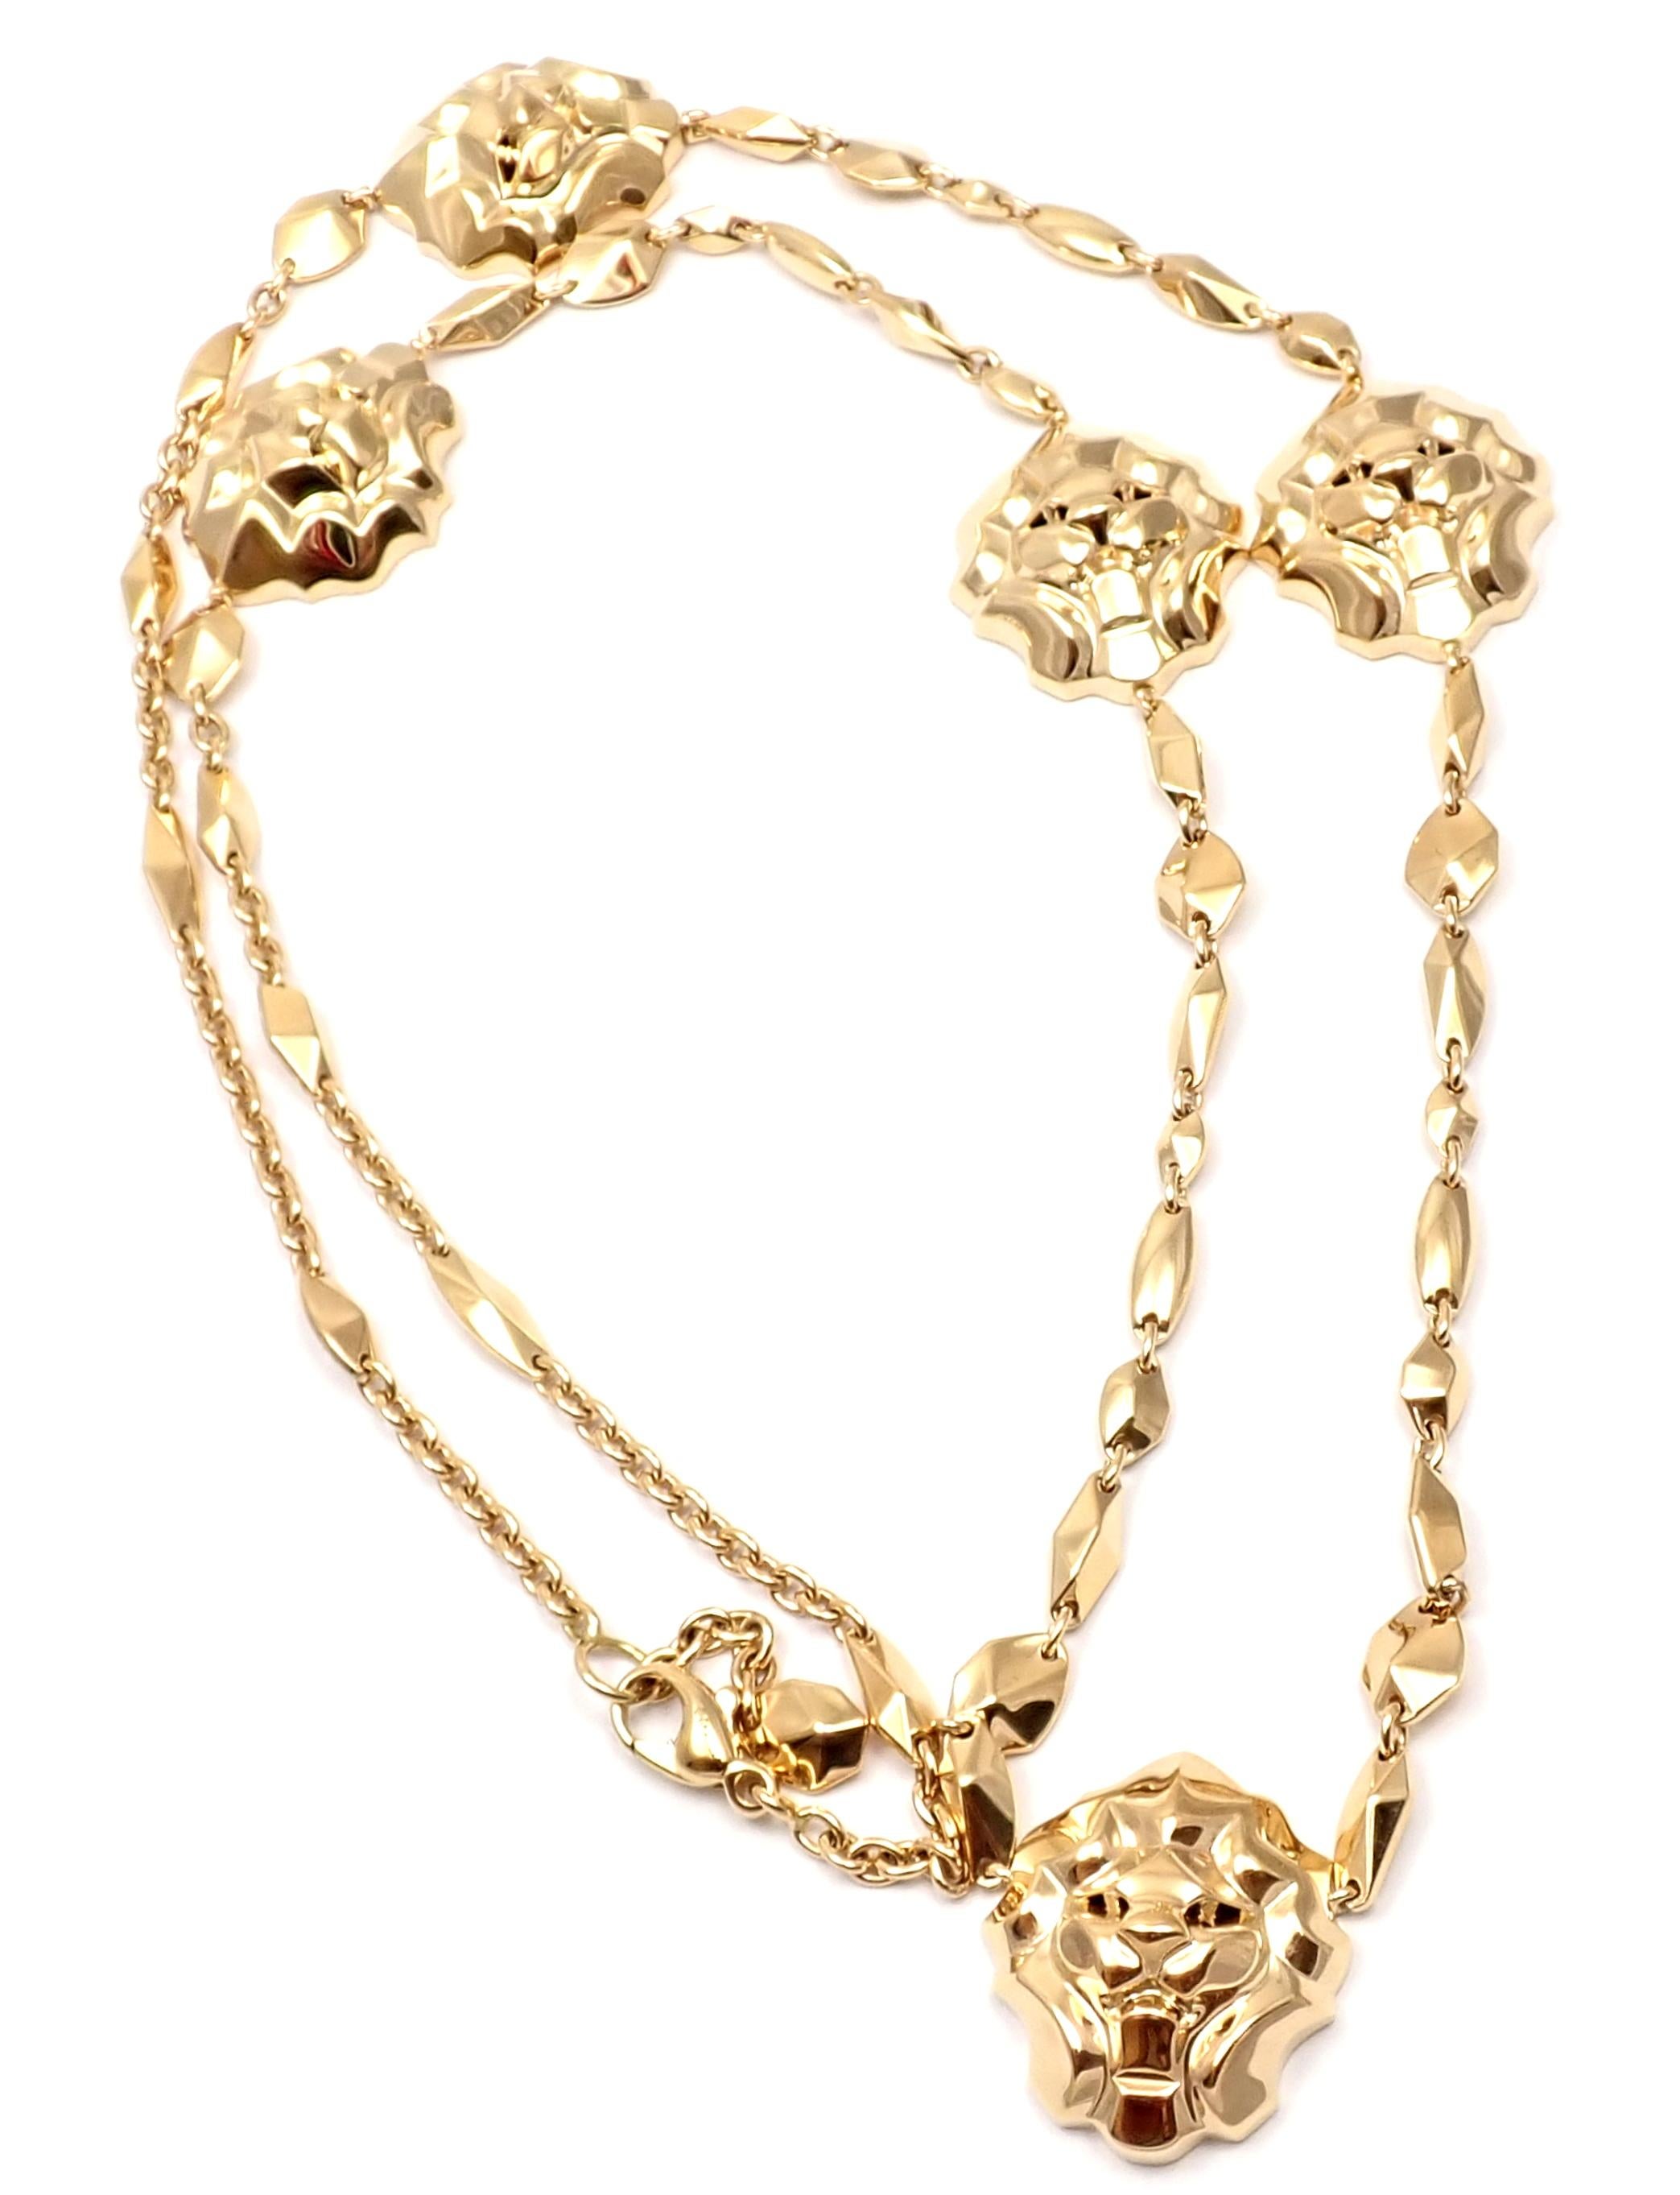 18k Yellow Gold Lion Five Station Link Necklace by Chanel. 
With 5 stations 22mm x 26mm each
Details: 
Length: 28.5